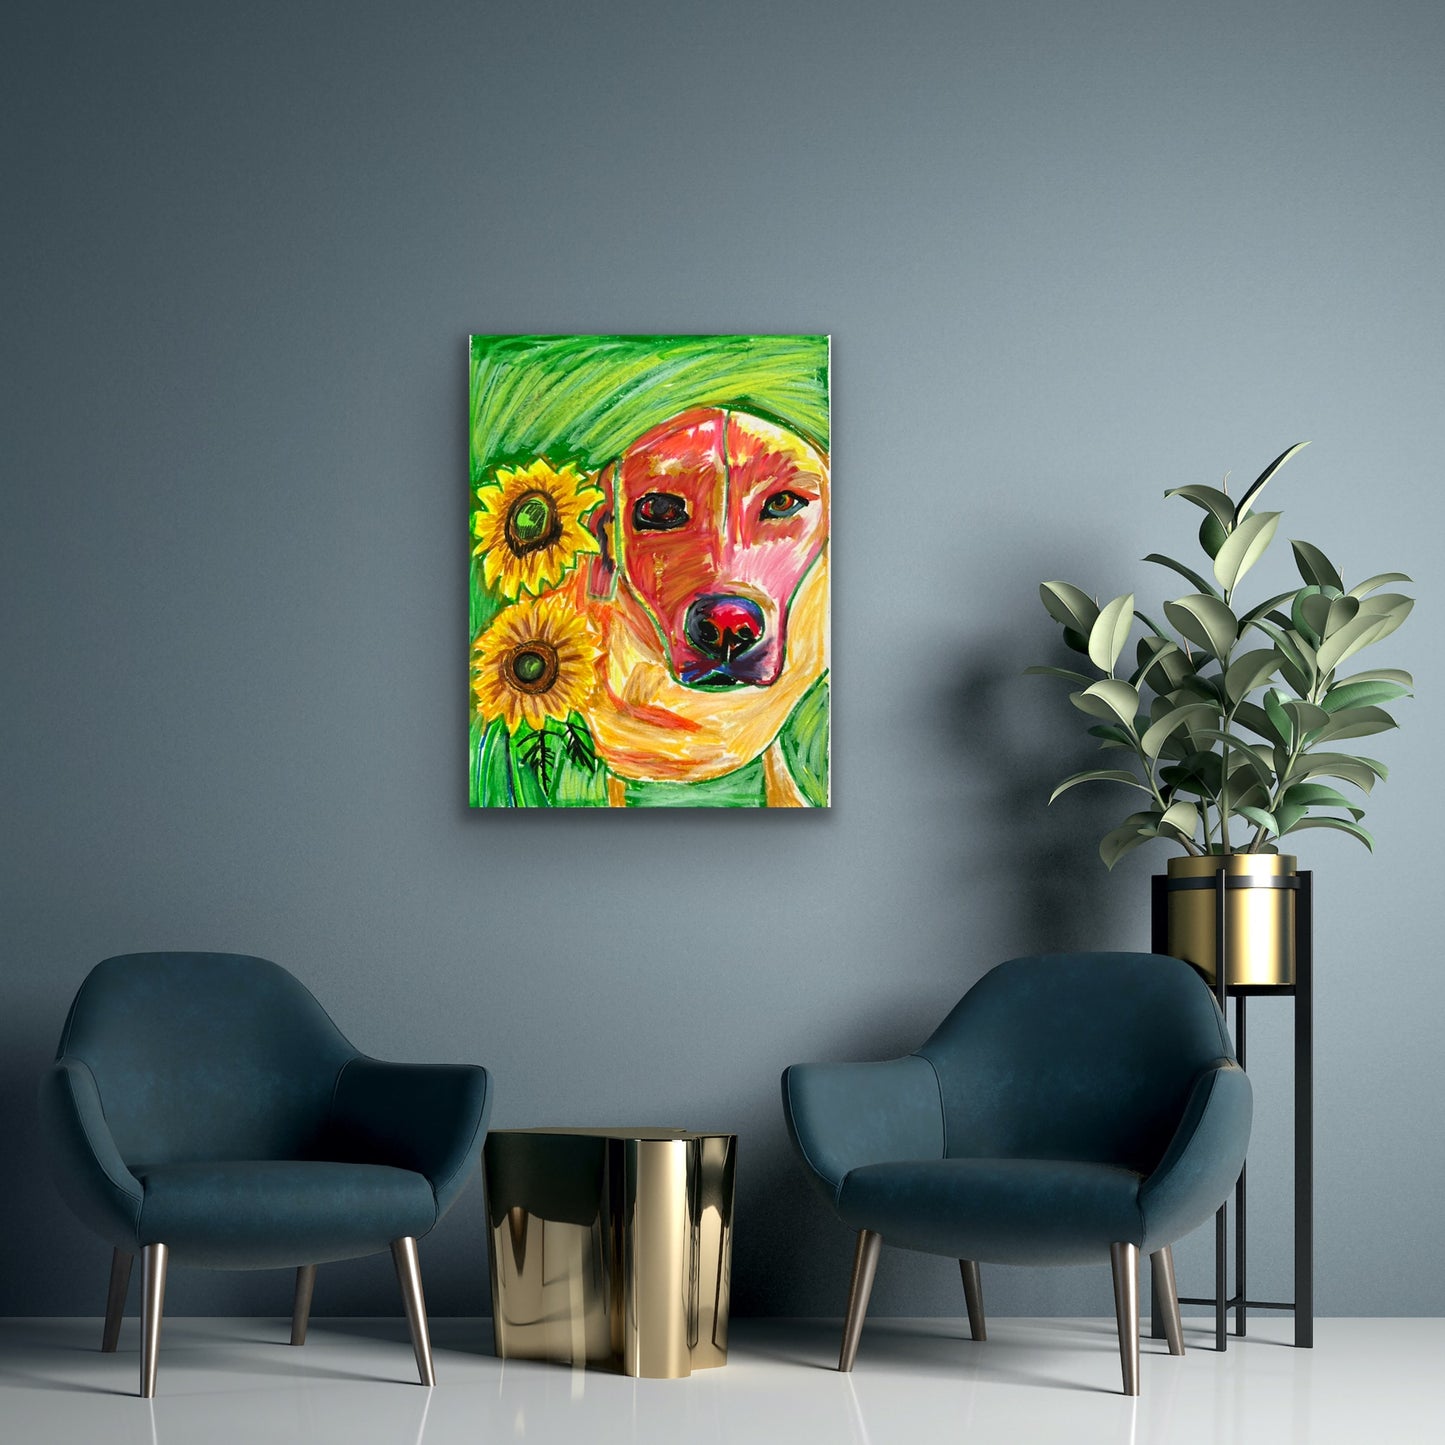 Labrador and the sunflowers - Stretched Canvas Print in more sizes